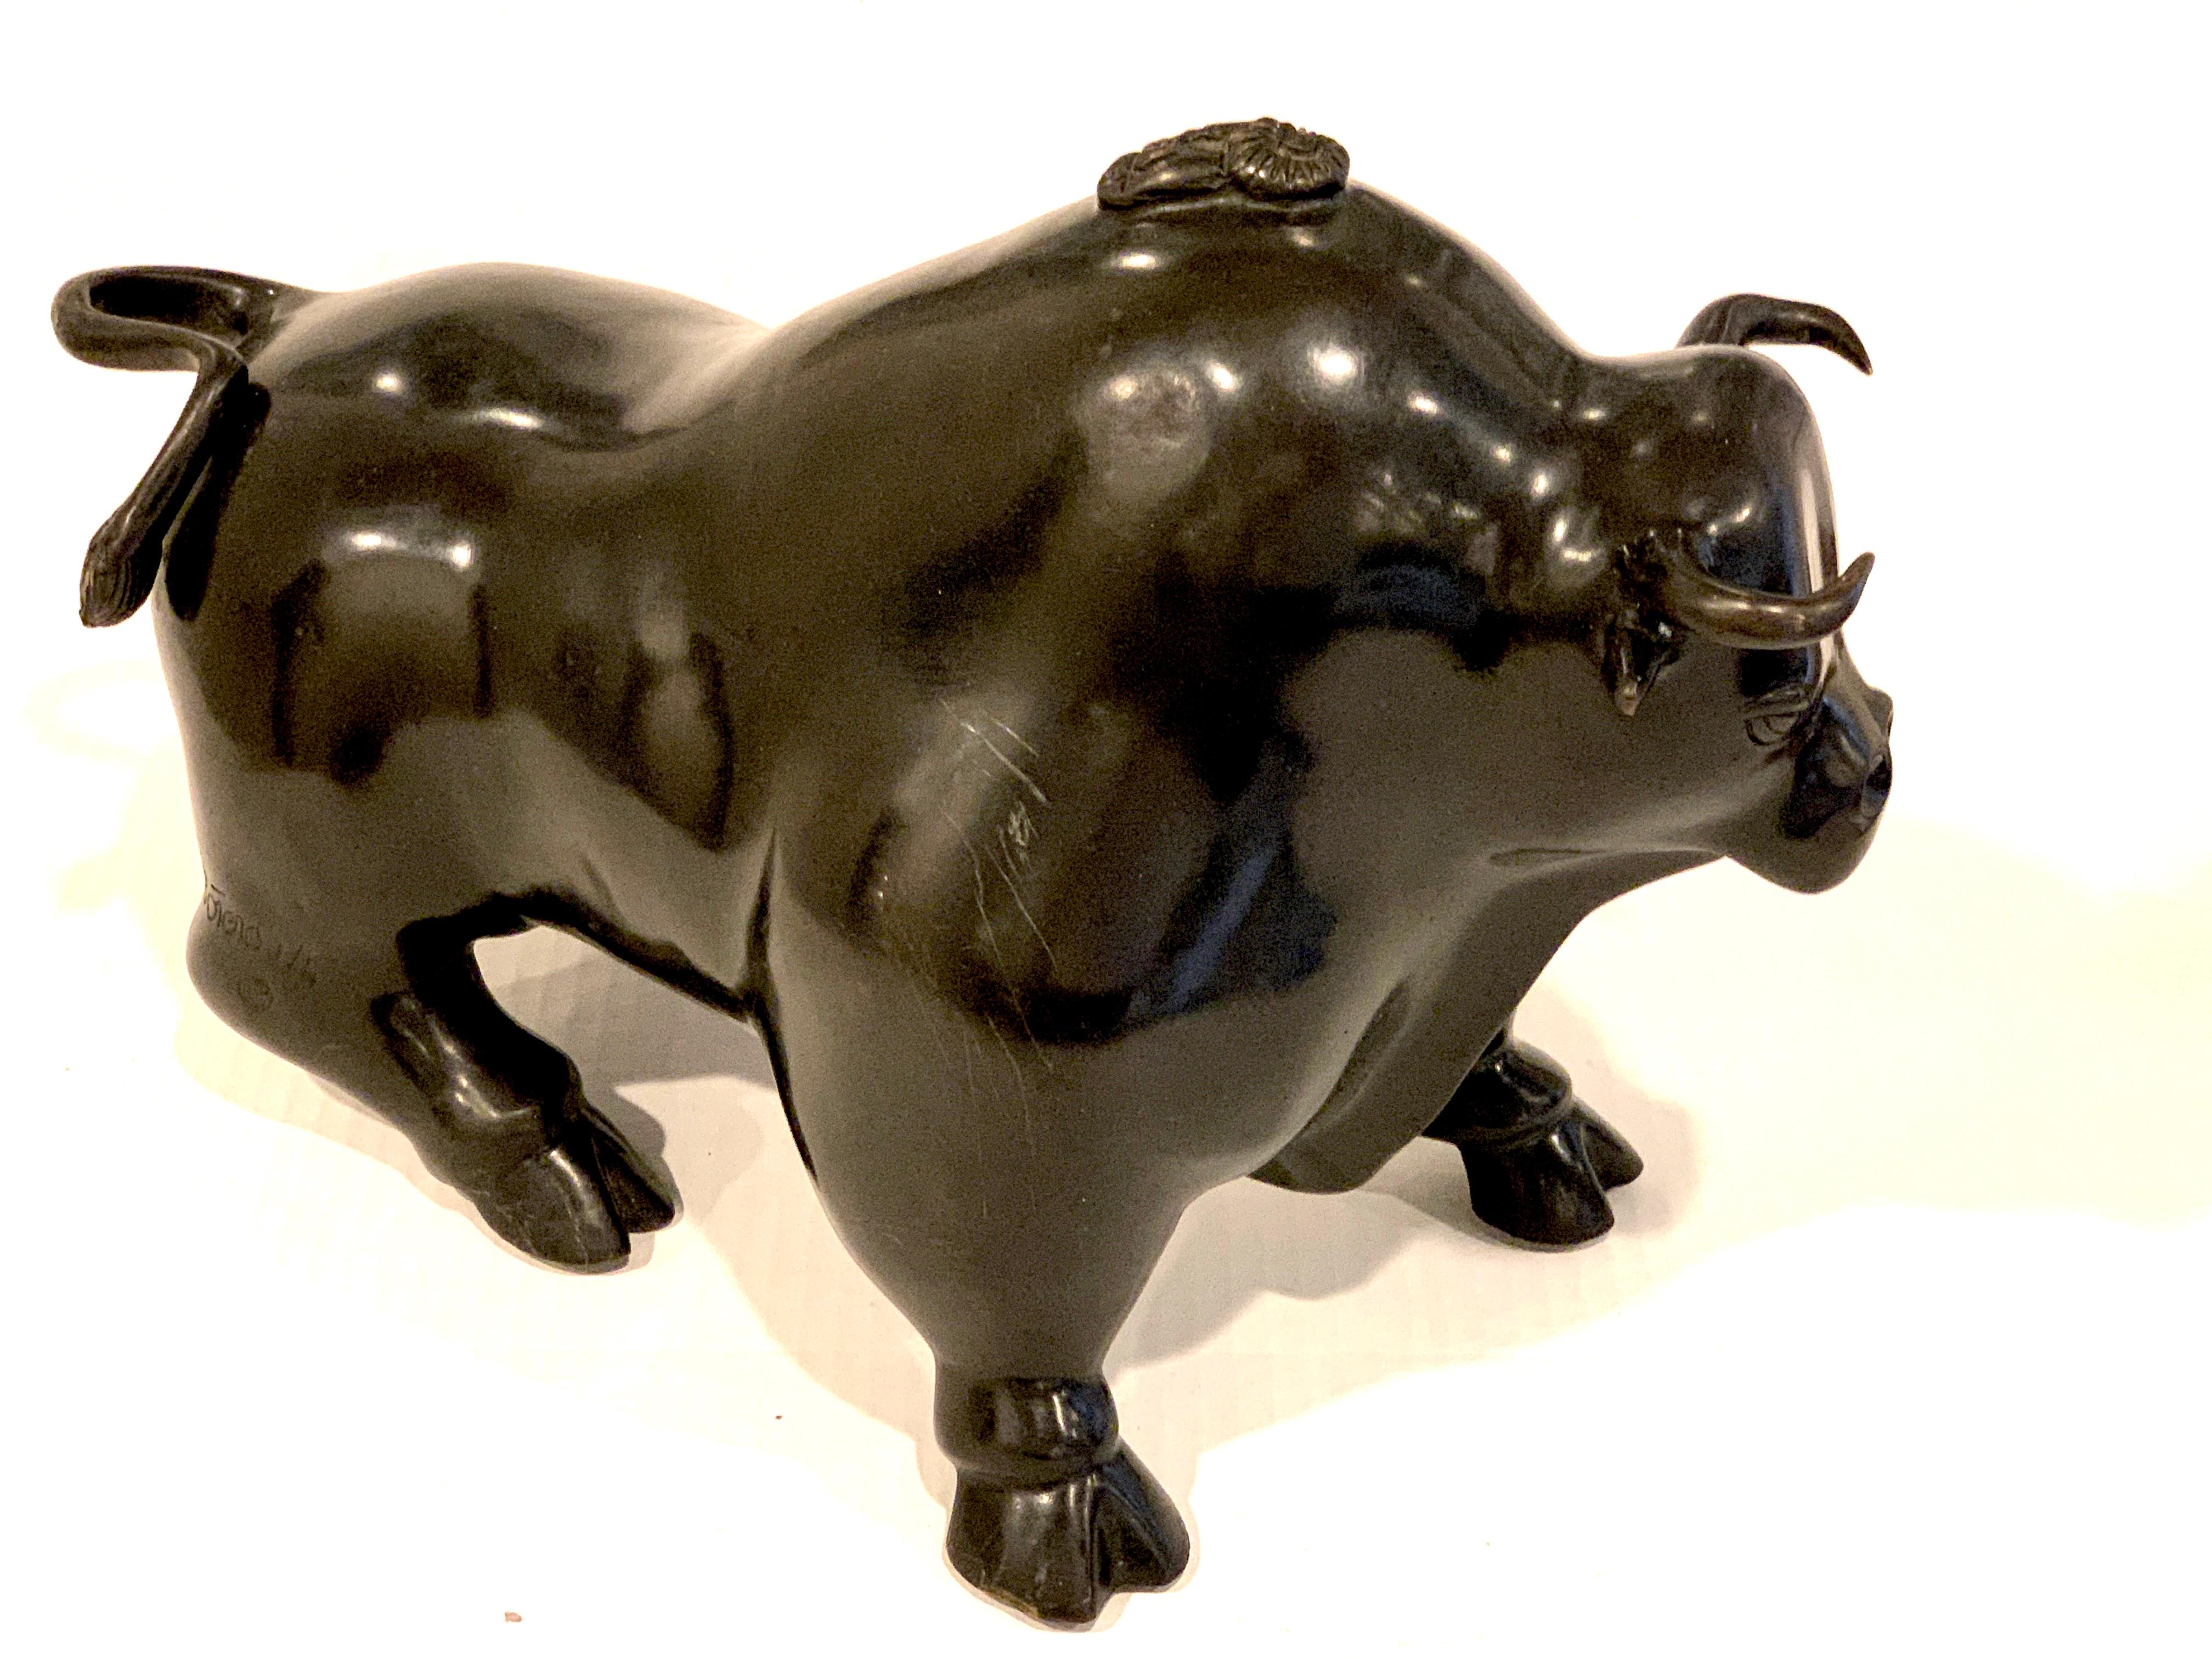 After Fernando Botero, bronze prize bull
Signed Botero and numbered 1/4, Foundry Mark
Beautiful patina, nice example.

This work is after* Fernando Botero, (born April 19, 1932) Colombian artist known 
for his his signature style, also known as